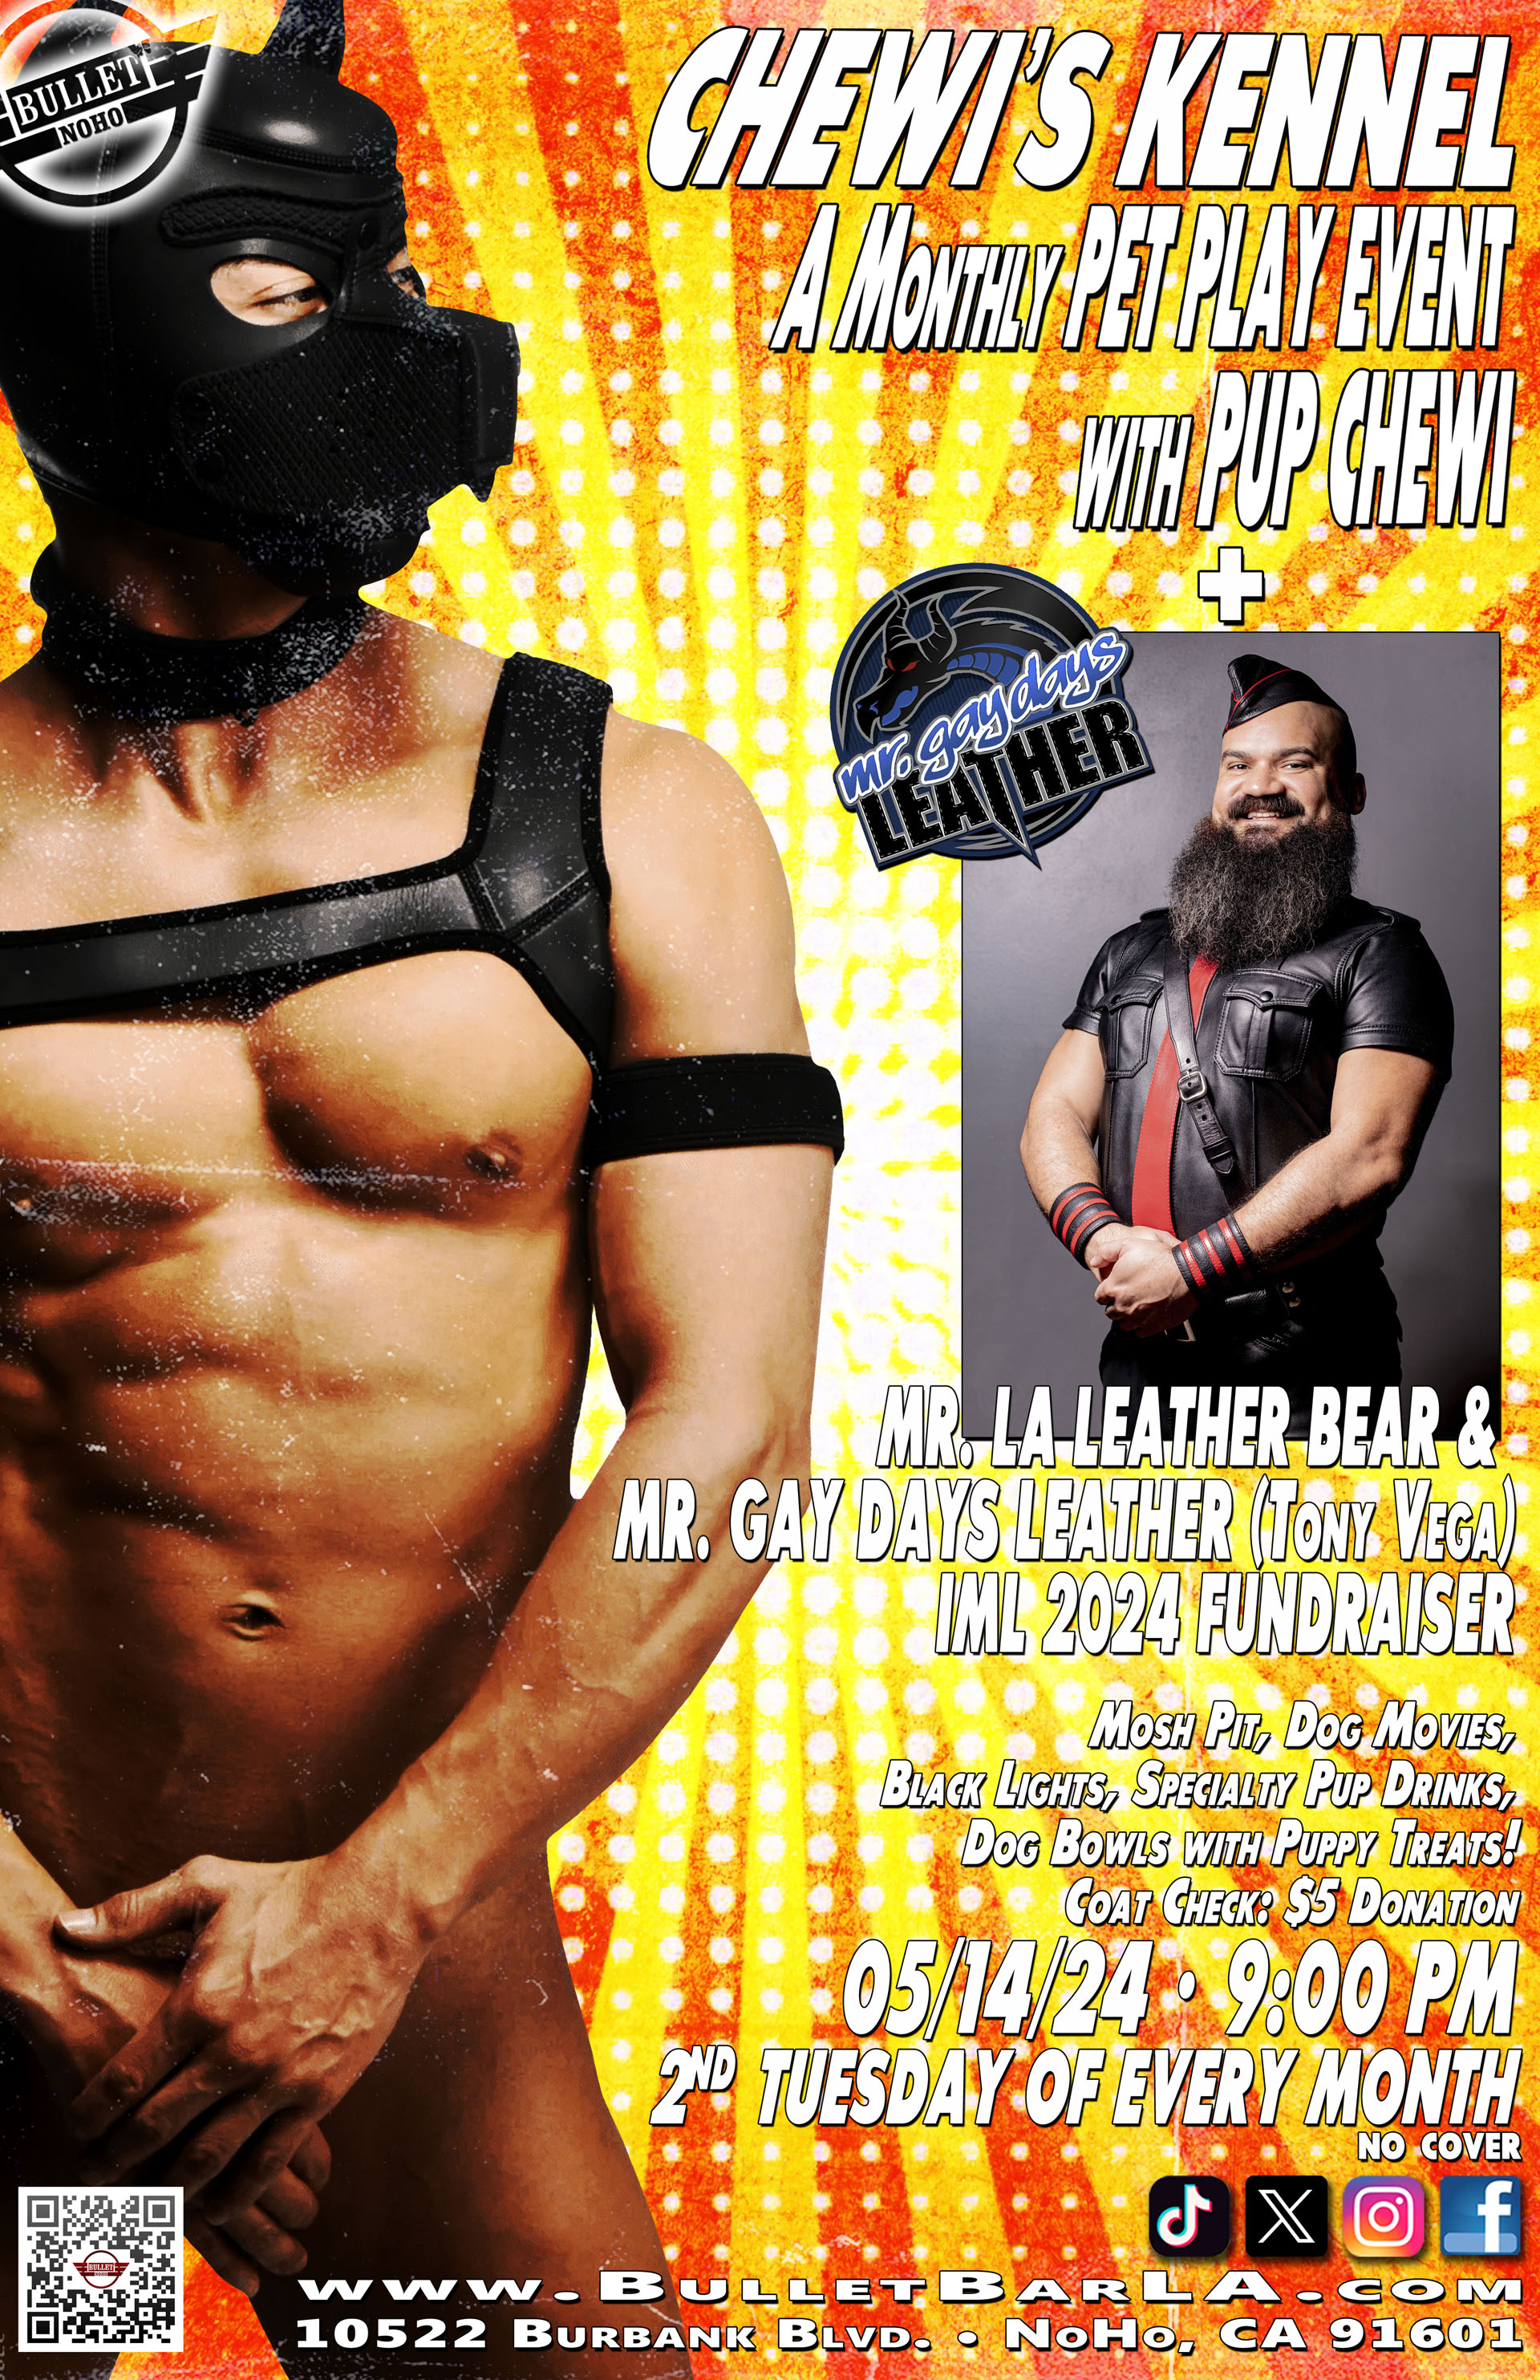 The Bullet Bar invites you to CHEWI'S KENNEL with PUP CHEWI (BARTENDER KIRK): 05/14/24 @ 9:00 PM! The 2nd Tuesday of every month! Mosh Pit, Dog Movies, Black Lights, Specialty Pup Drinks, Dog Bowls with Puppy Treats! Plus MR. LA LEATHER BEAR & MR. GAY DAYS LEATHER, Tony Vega, IML 2024 Fundraiser! No cover.